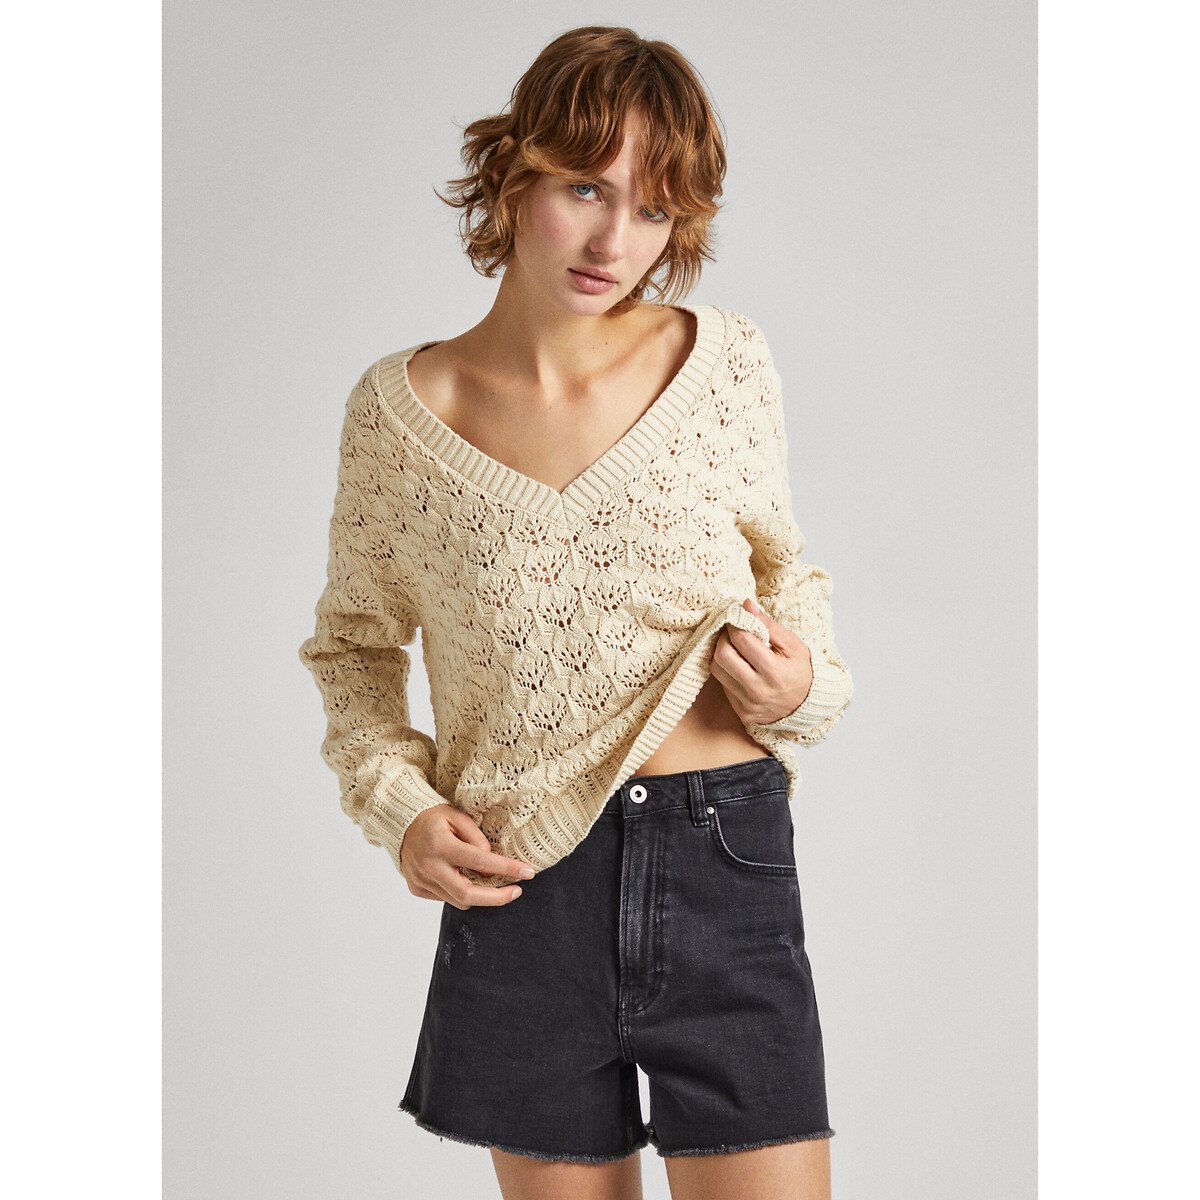 Pepe jeans Trui in ajour tricot, V-hals